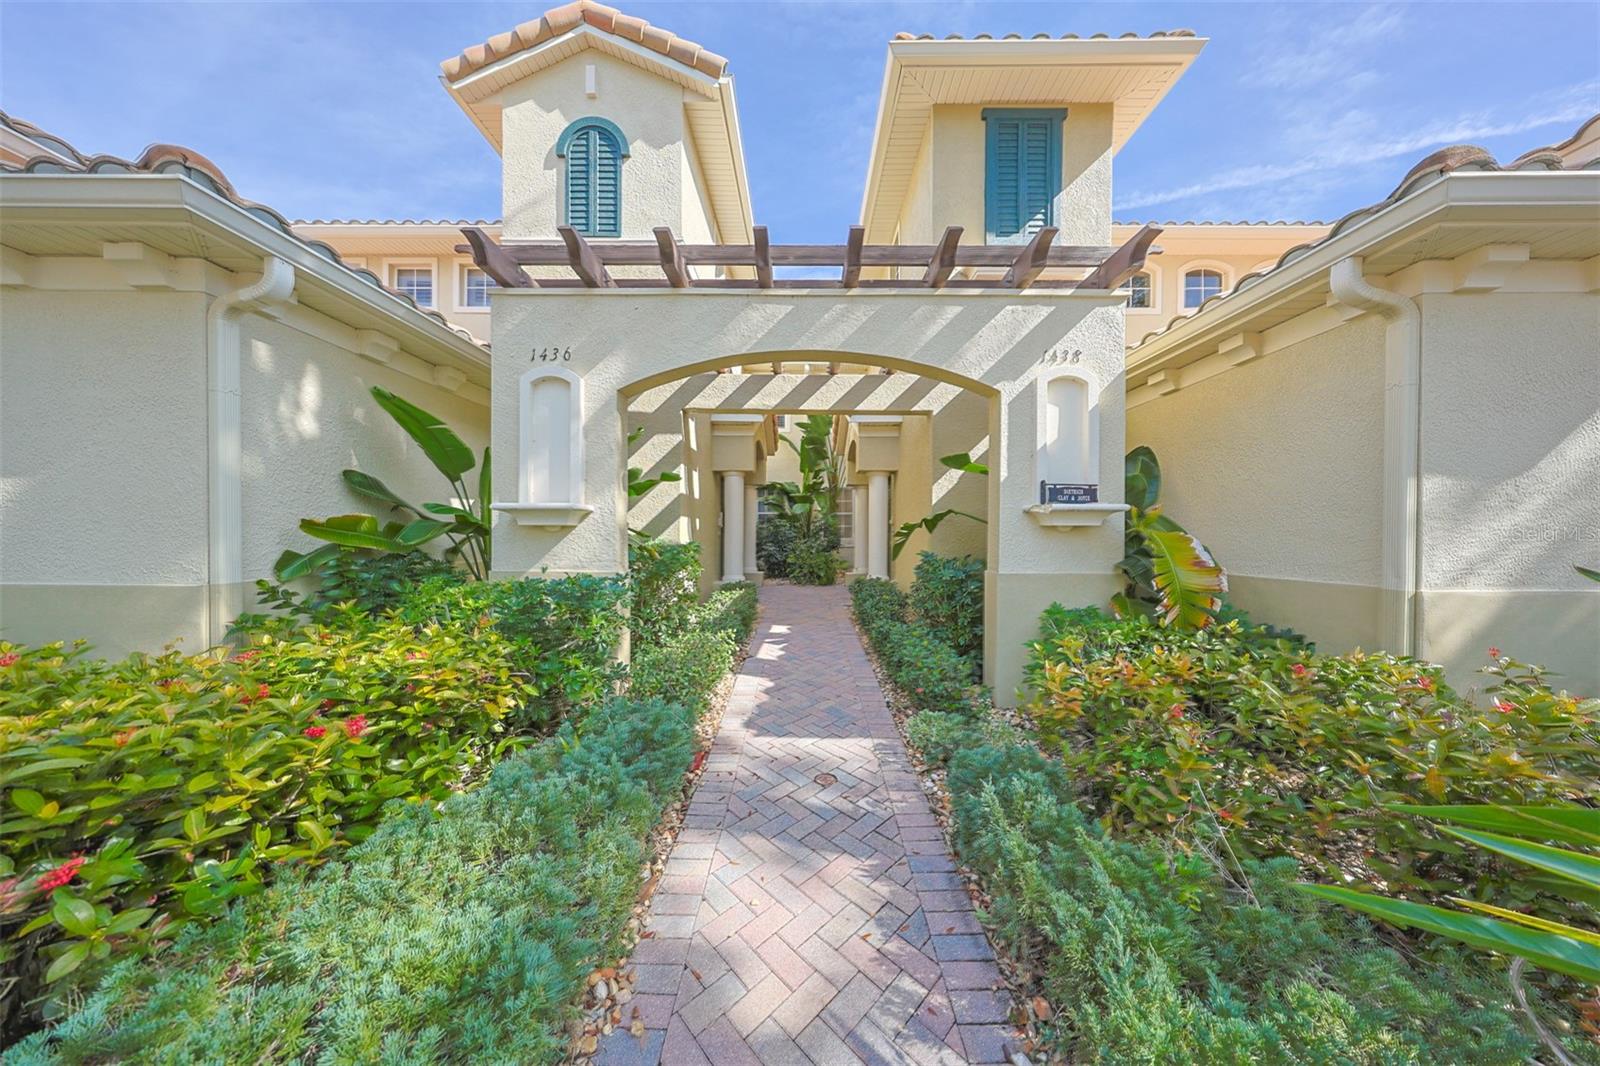 Front entrance of this WATERFRONT luxury Tuscan-style condo unit which is beautifully manicured and well maintained. Walking to the front door or up and down the street, you immediately feel the "Tuscan" vibes.